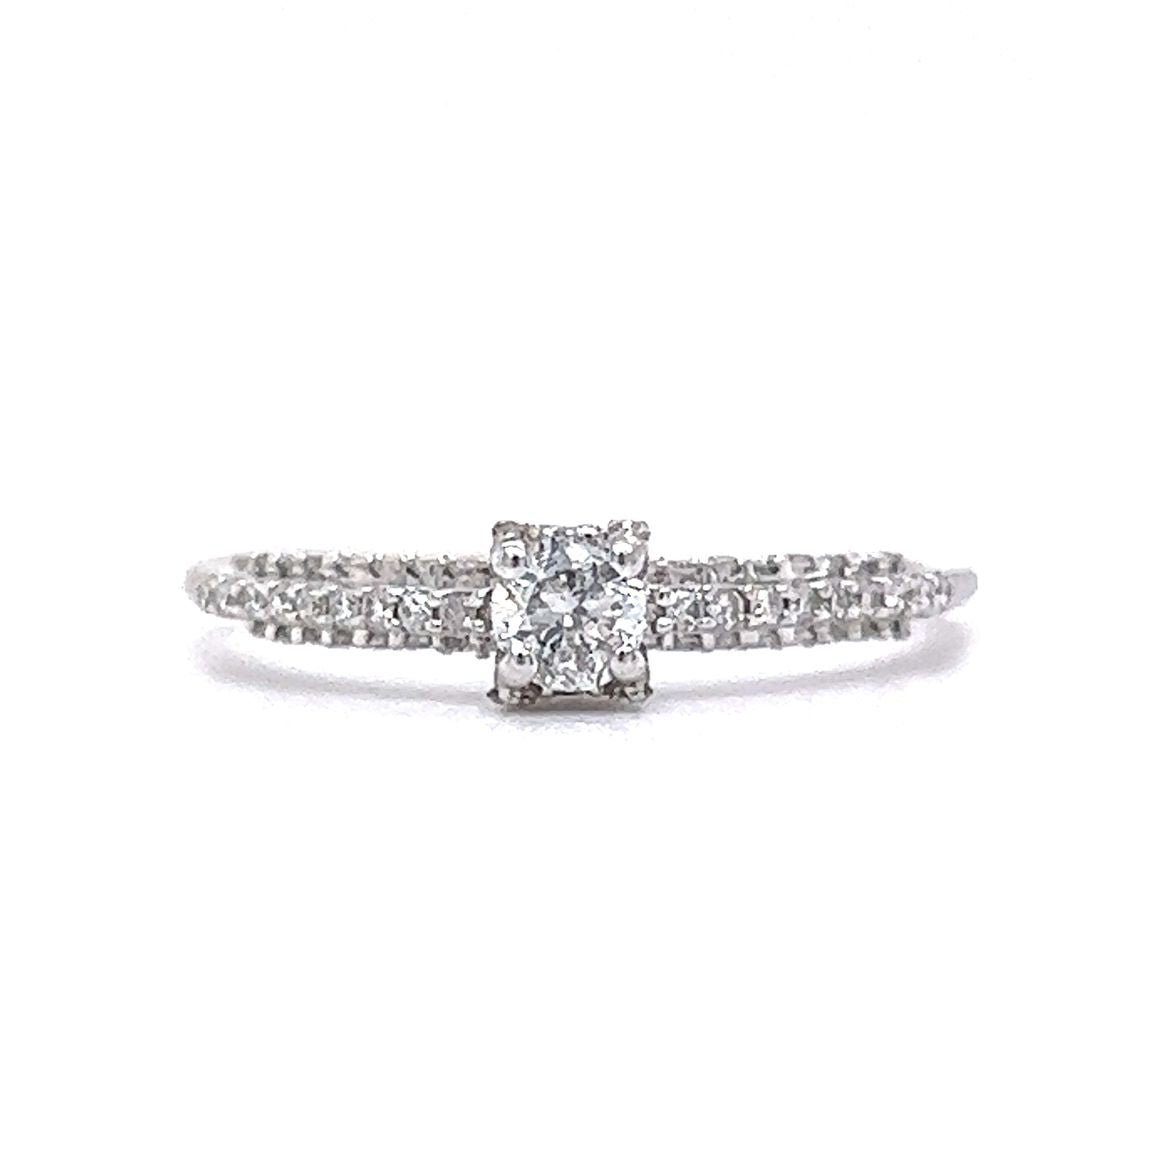 .16 Natural Round Diamond Engagement Ring in 14k White Gold